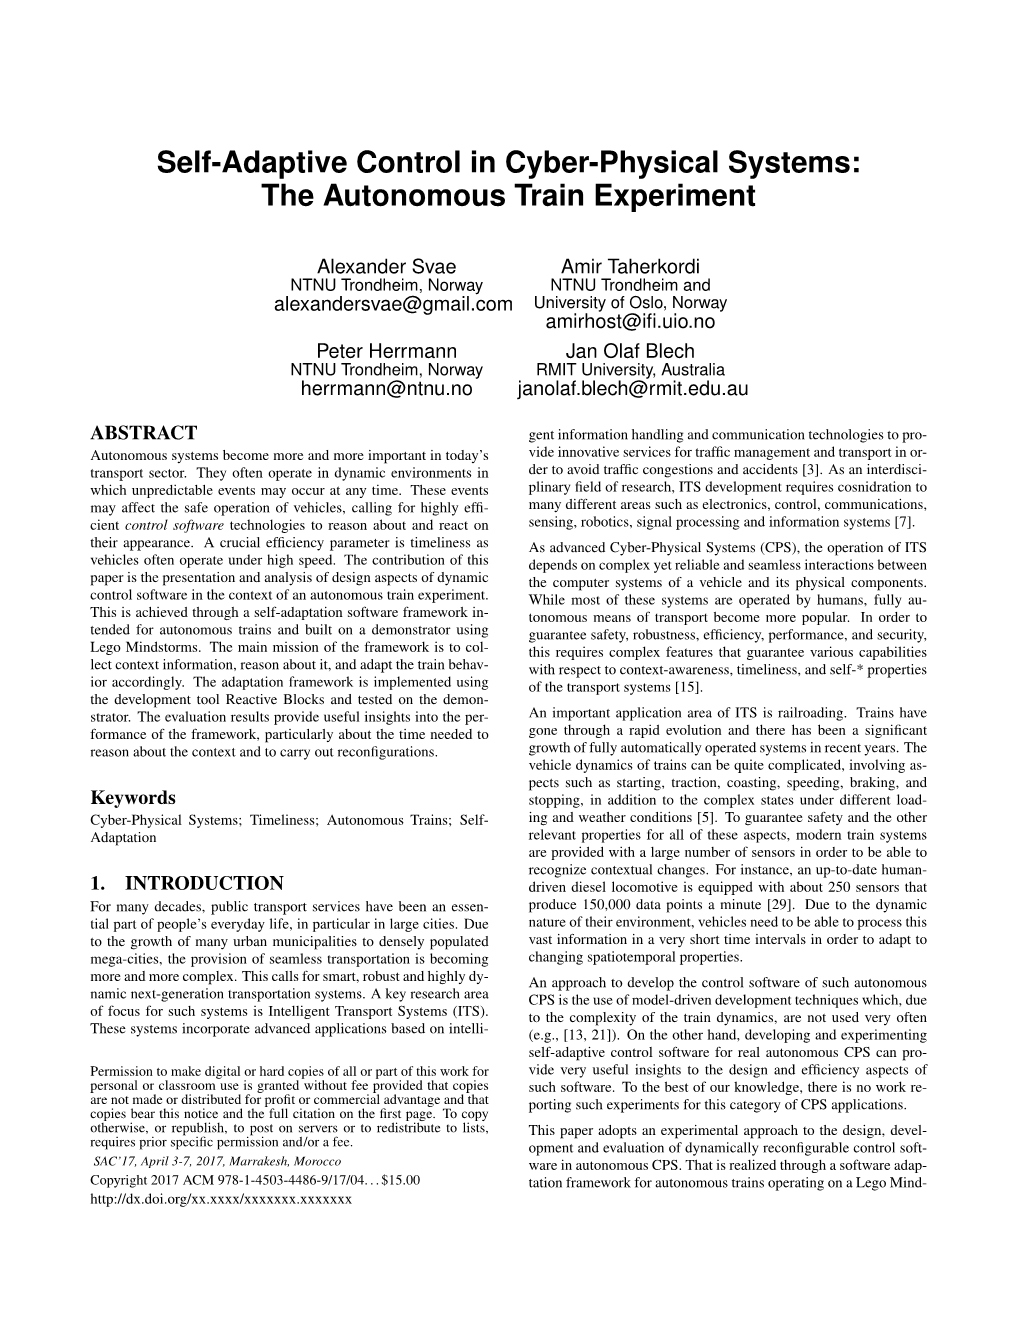 Self-Adaptive Control in Cyber-Physical Systems: the Autonomous Train Experiment